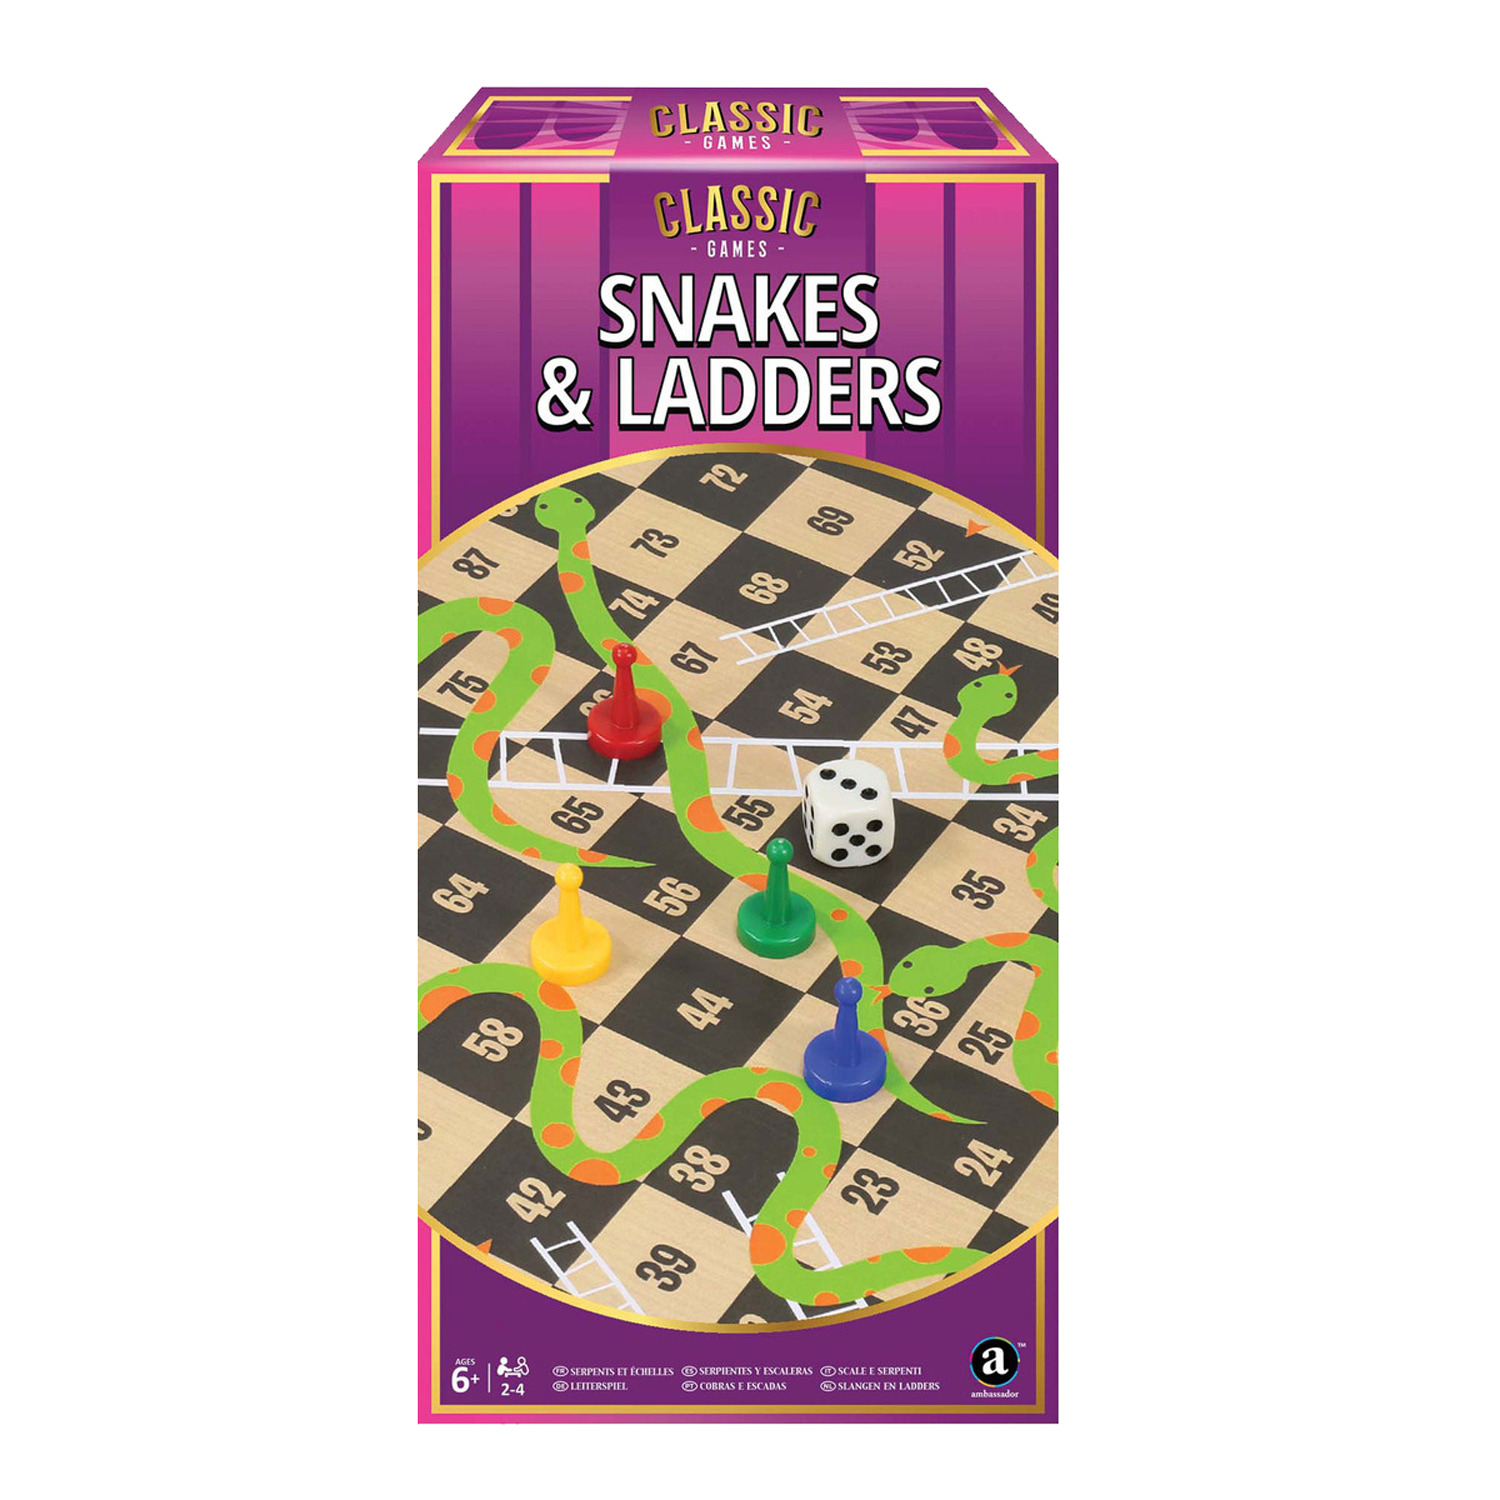 Classic Games - Snakes & Ladders